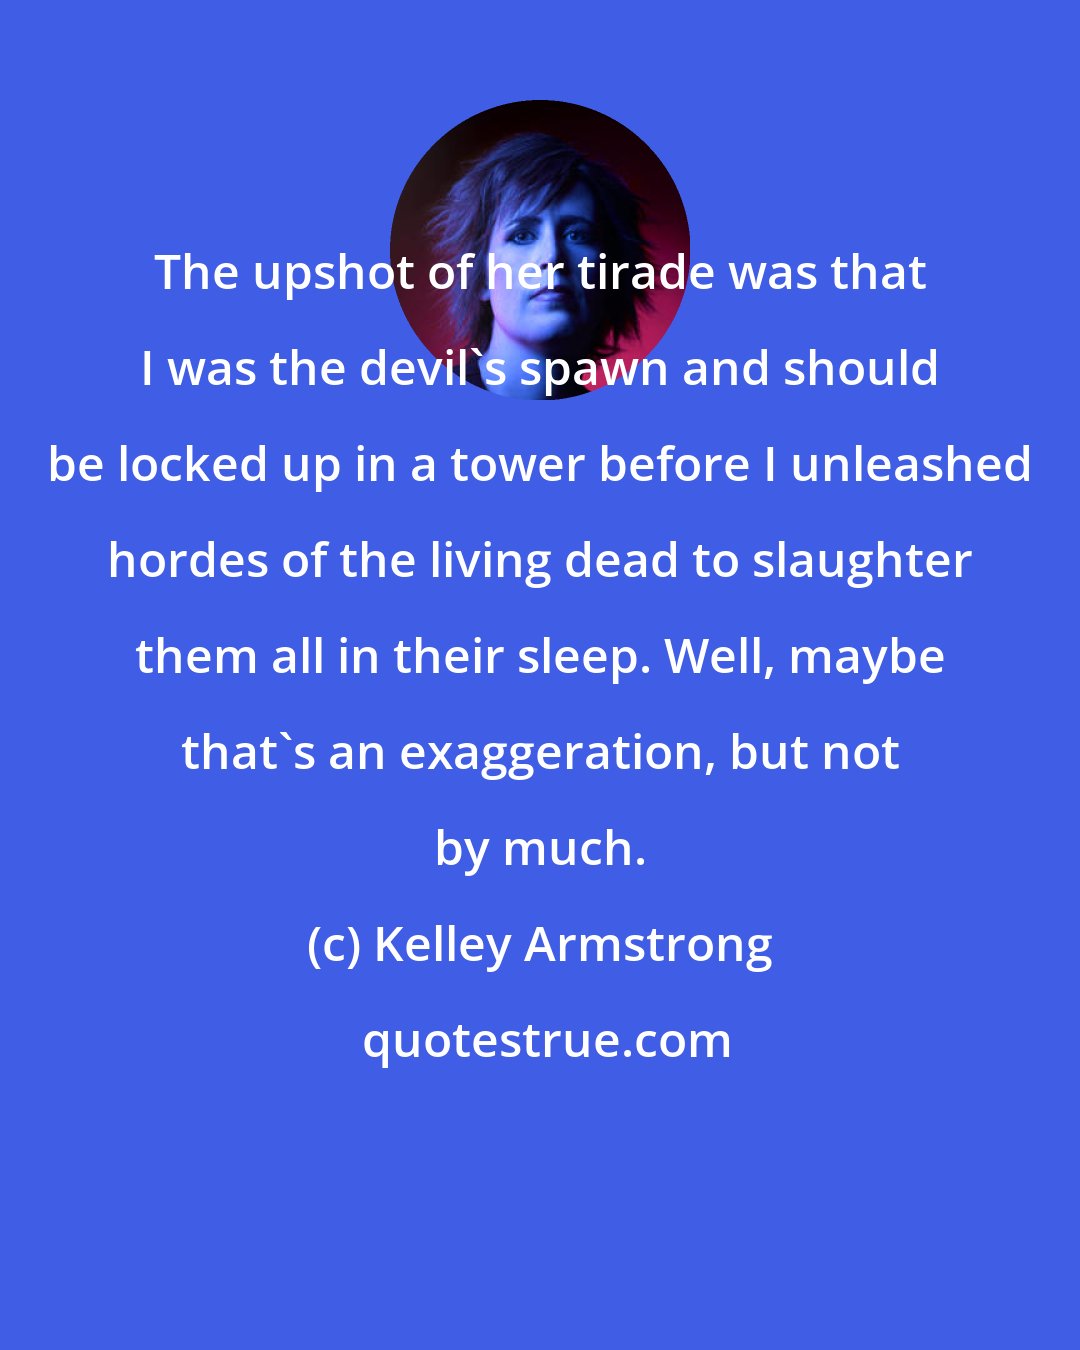 Kelley Armstrong: The upshot of her tirade was that I was the devil's spawn and should be locked up in a tower before I unleashed hordes of the living dead to slaughter them all in their sleep. Well, maybe that's an exaggeration, but not by much.